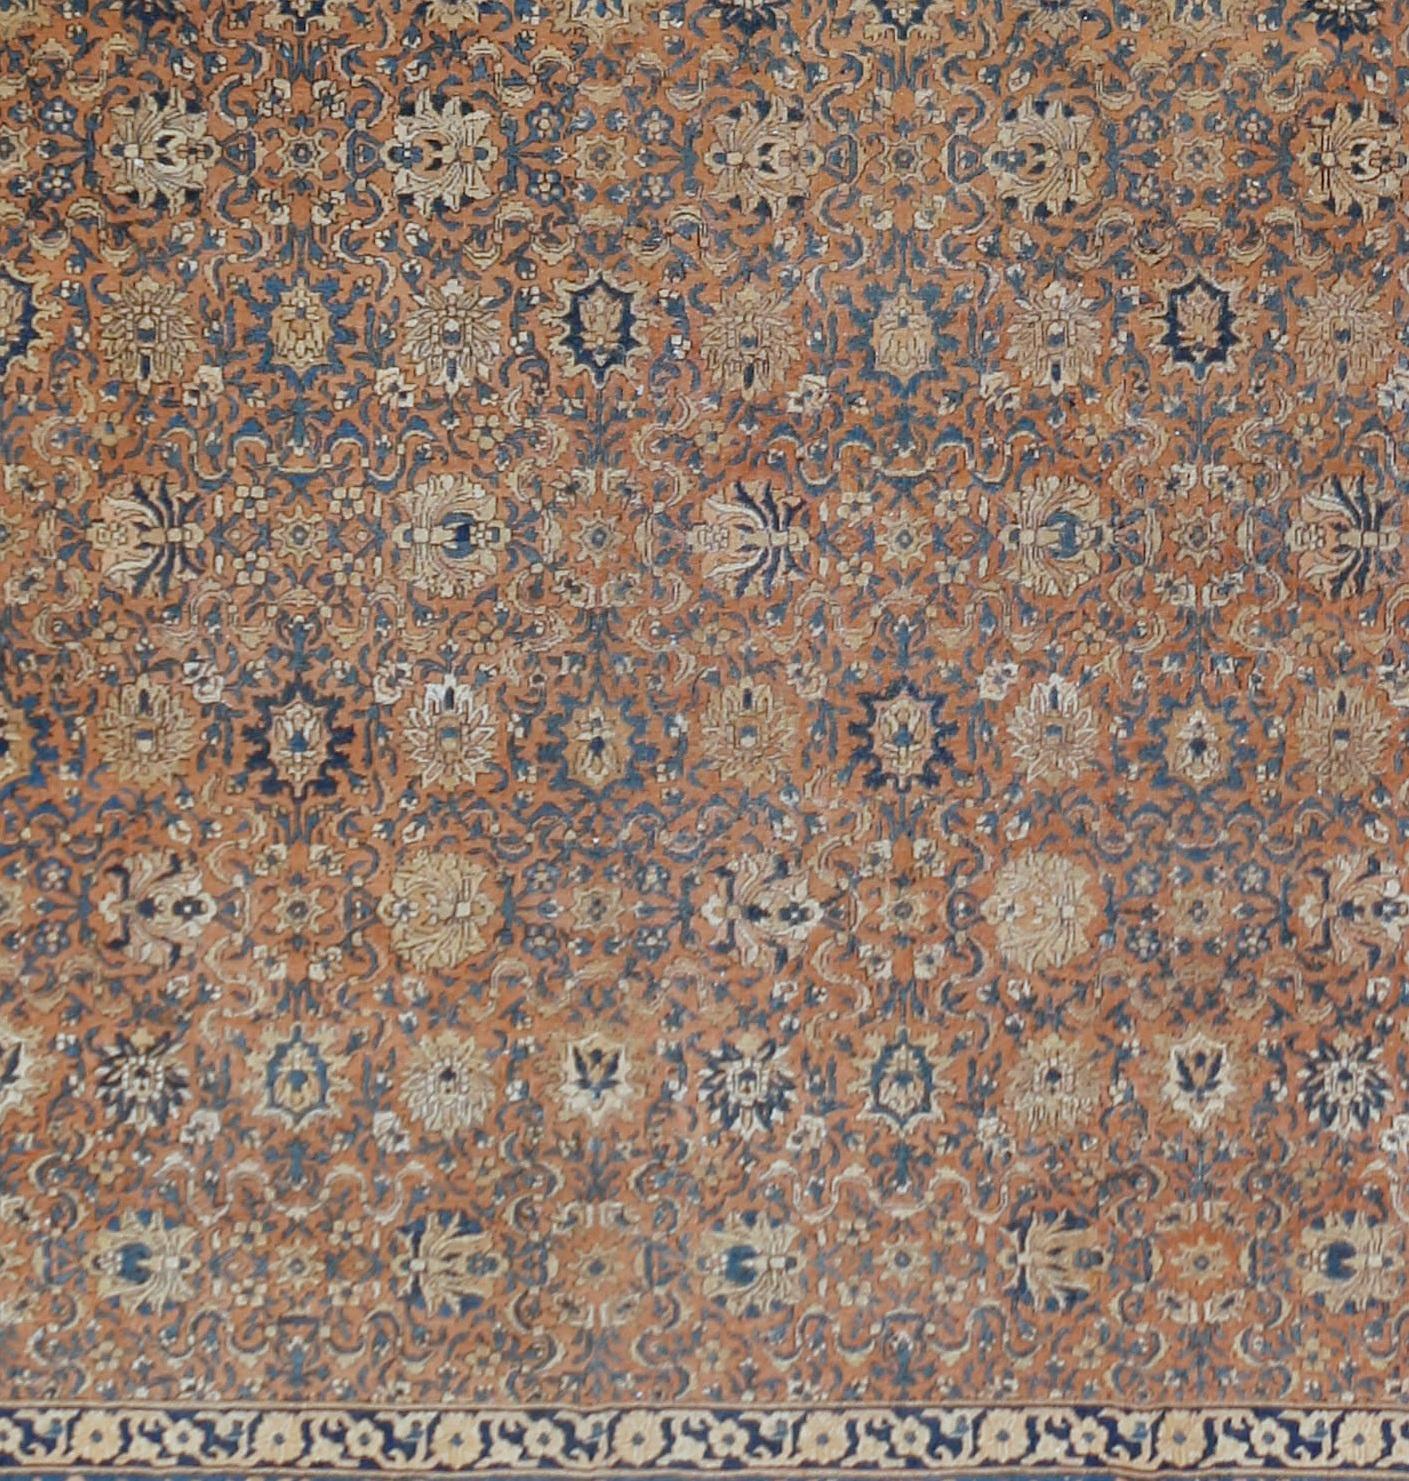 Antique Agra carpet, circa 1890 10'4 x 17'. This fine antique Agra carpet is a creative interpretation of an early 16th century Persian piece. The pattern is very dense in both field and border. The rust ground is closely covered by cloud bands and